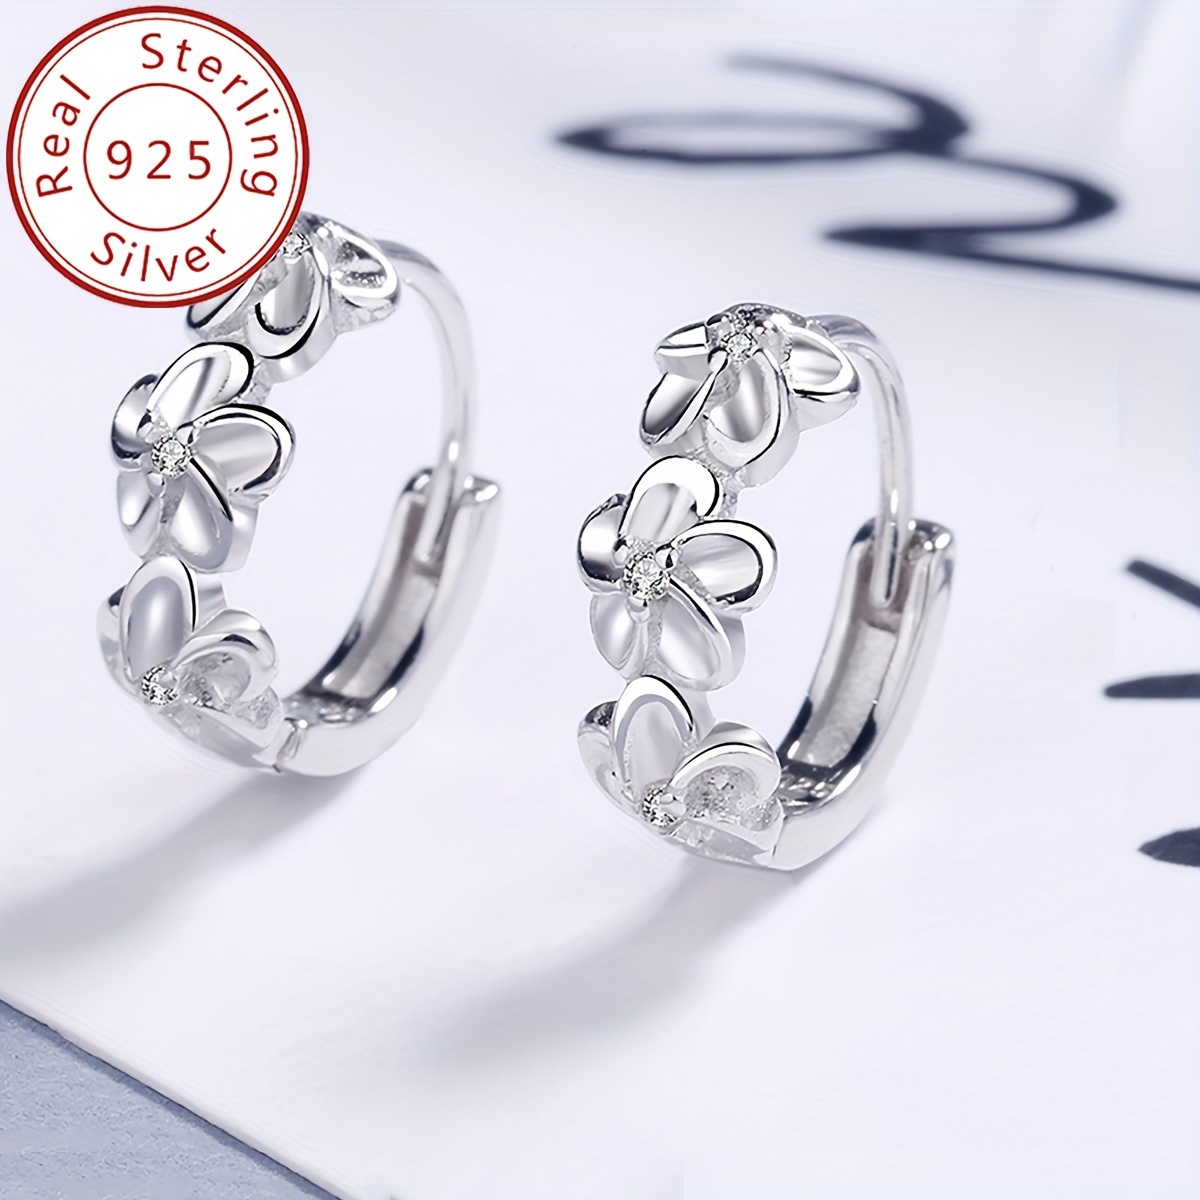 

Tiny Delicate 925 Sterling Silver Hypoallergenic Hoop Earrings With Flower Design Elegant Simple Style For Women Daily Casual